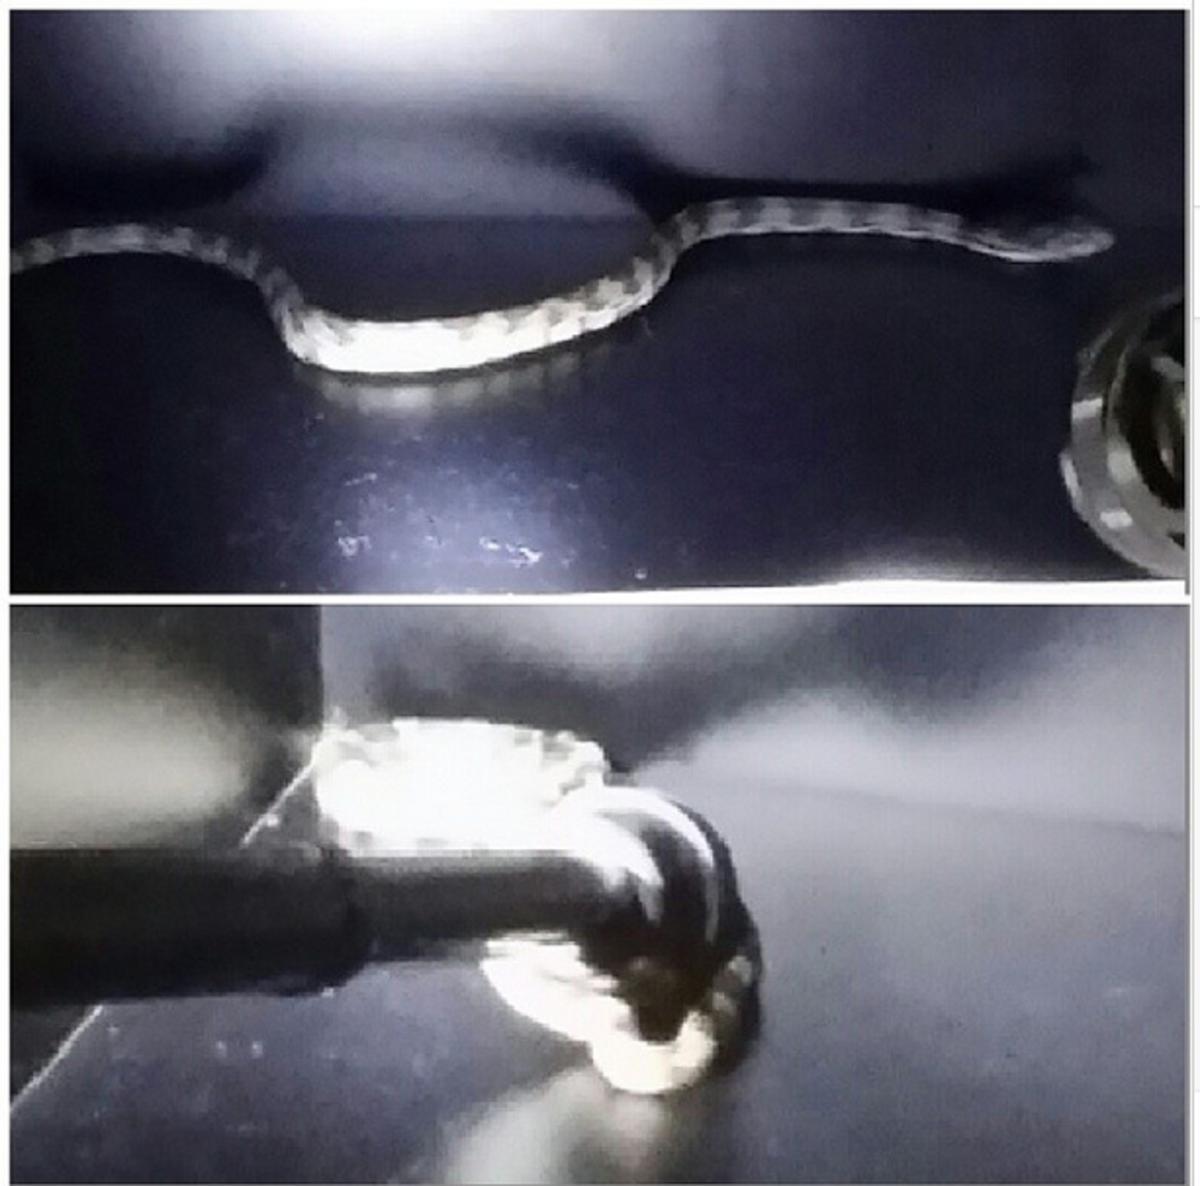 The Blazers found this snake in their locker room before Game 2 of their series vs. the Spurs. (Mo Williams/Instagram)